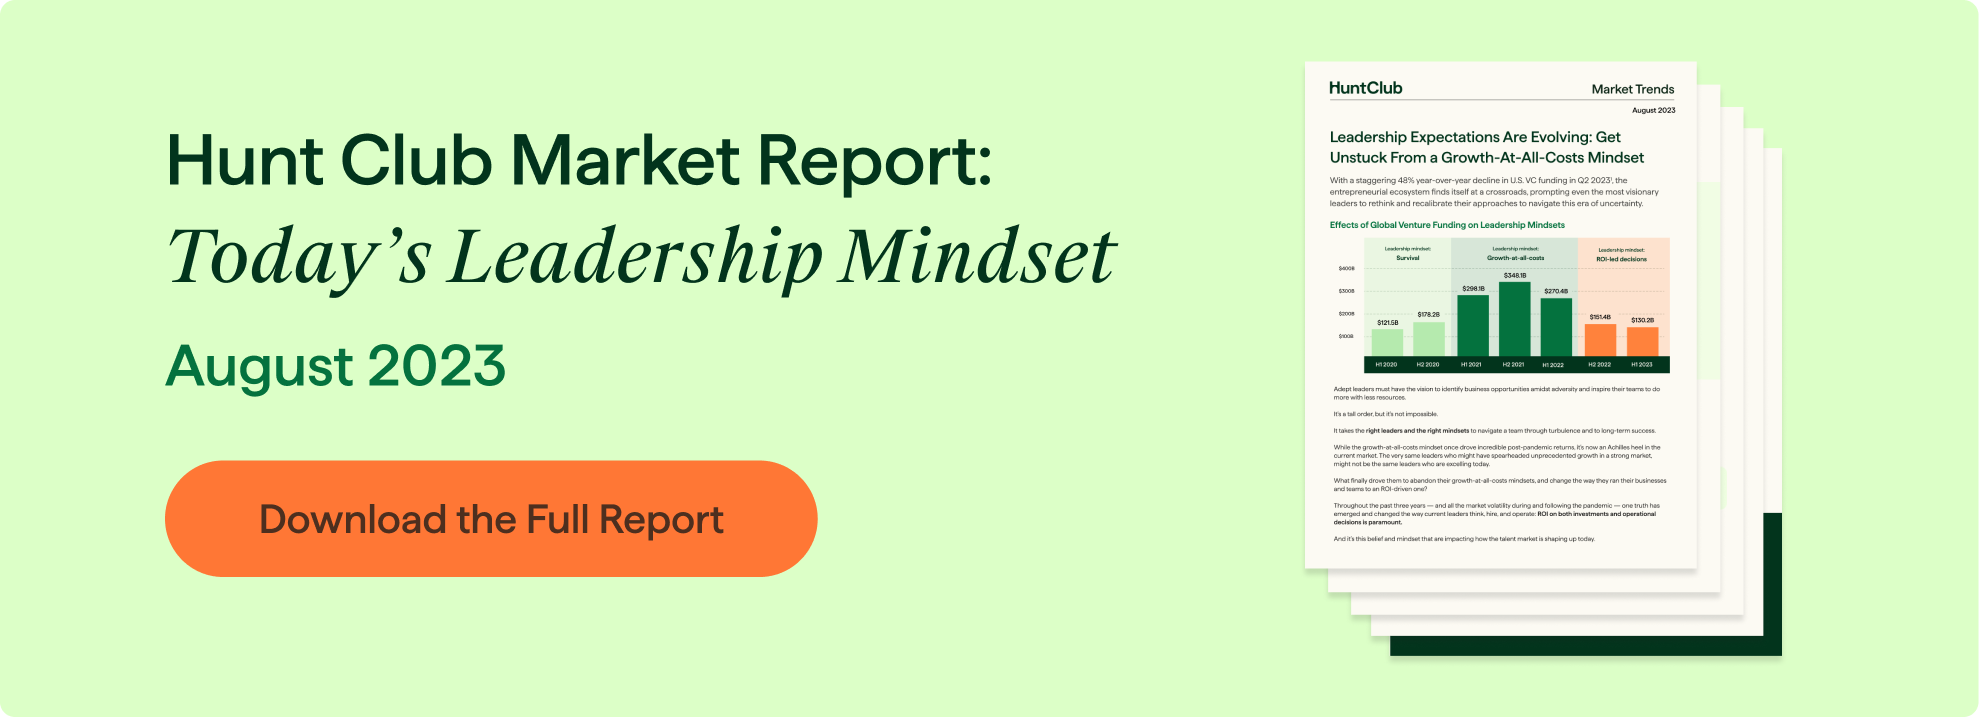 Hunt Club Market Report banner: Today’s Leadership Mindset with a CTA to download the full report